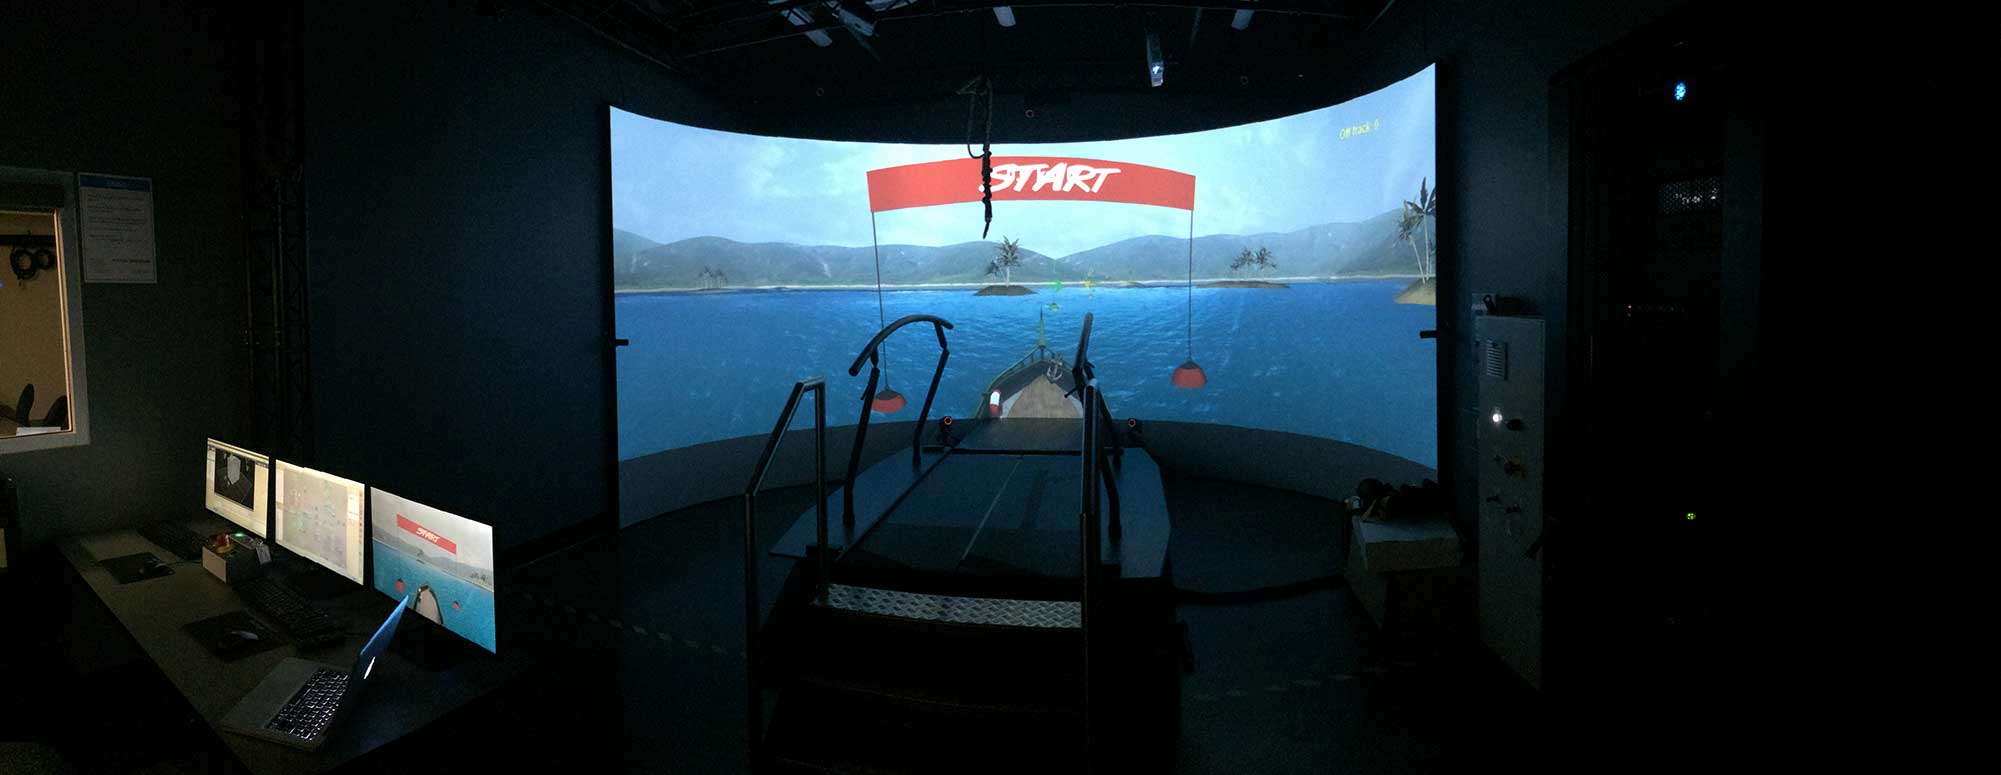 A virtual reality boat on water displays on the enormous curved screen that surrounds the rehab treadmill